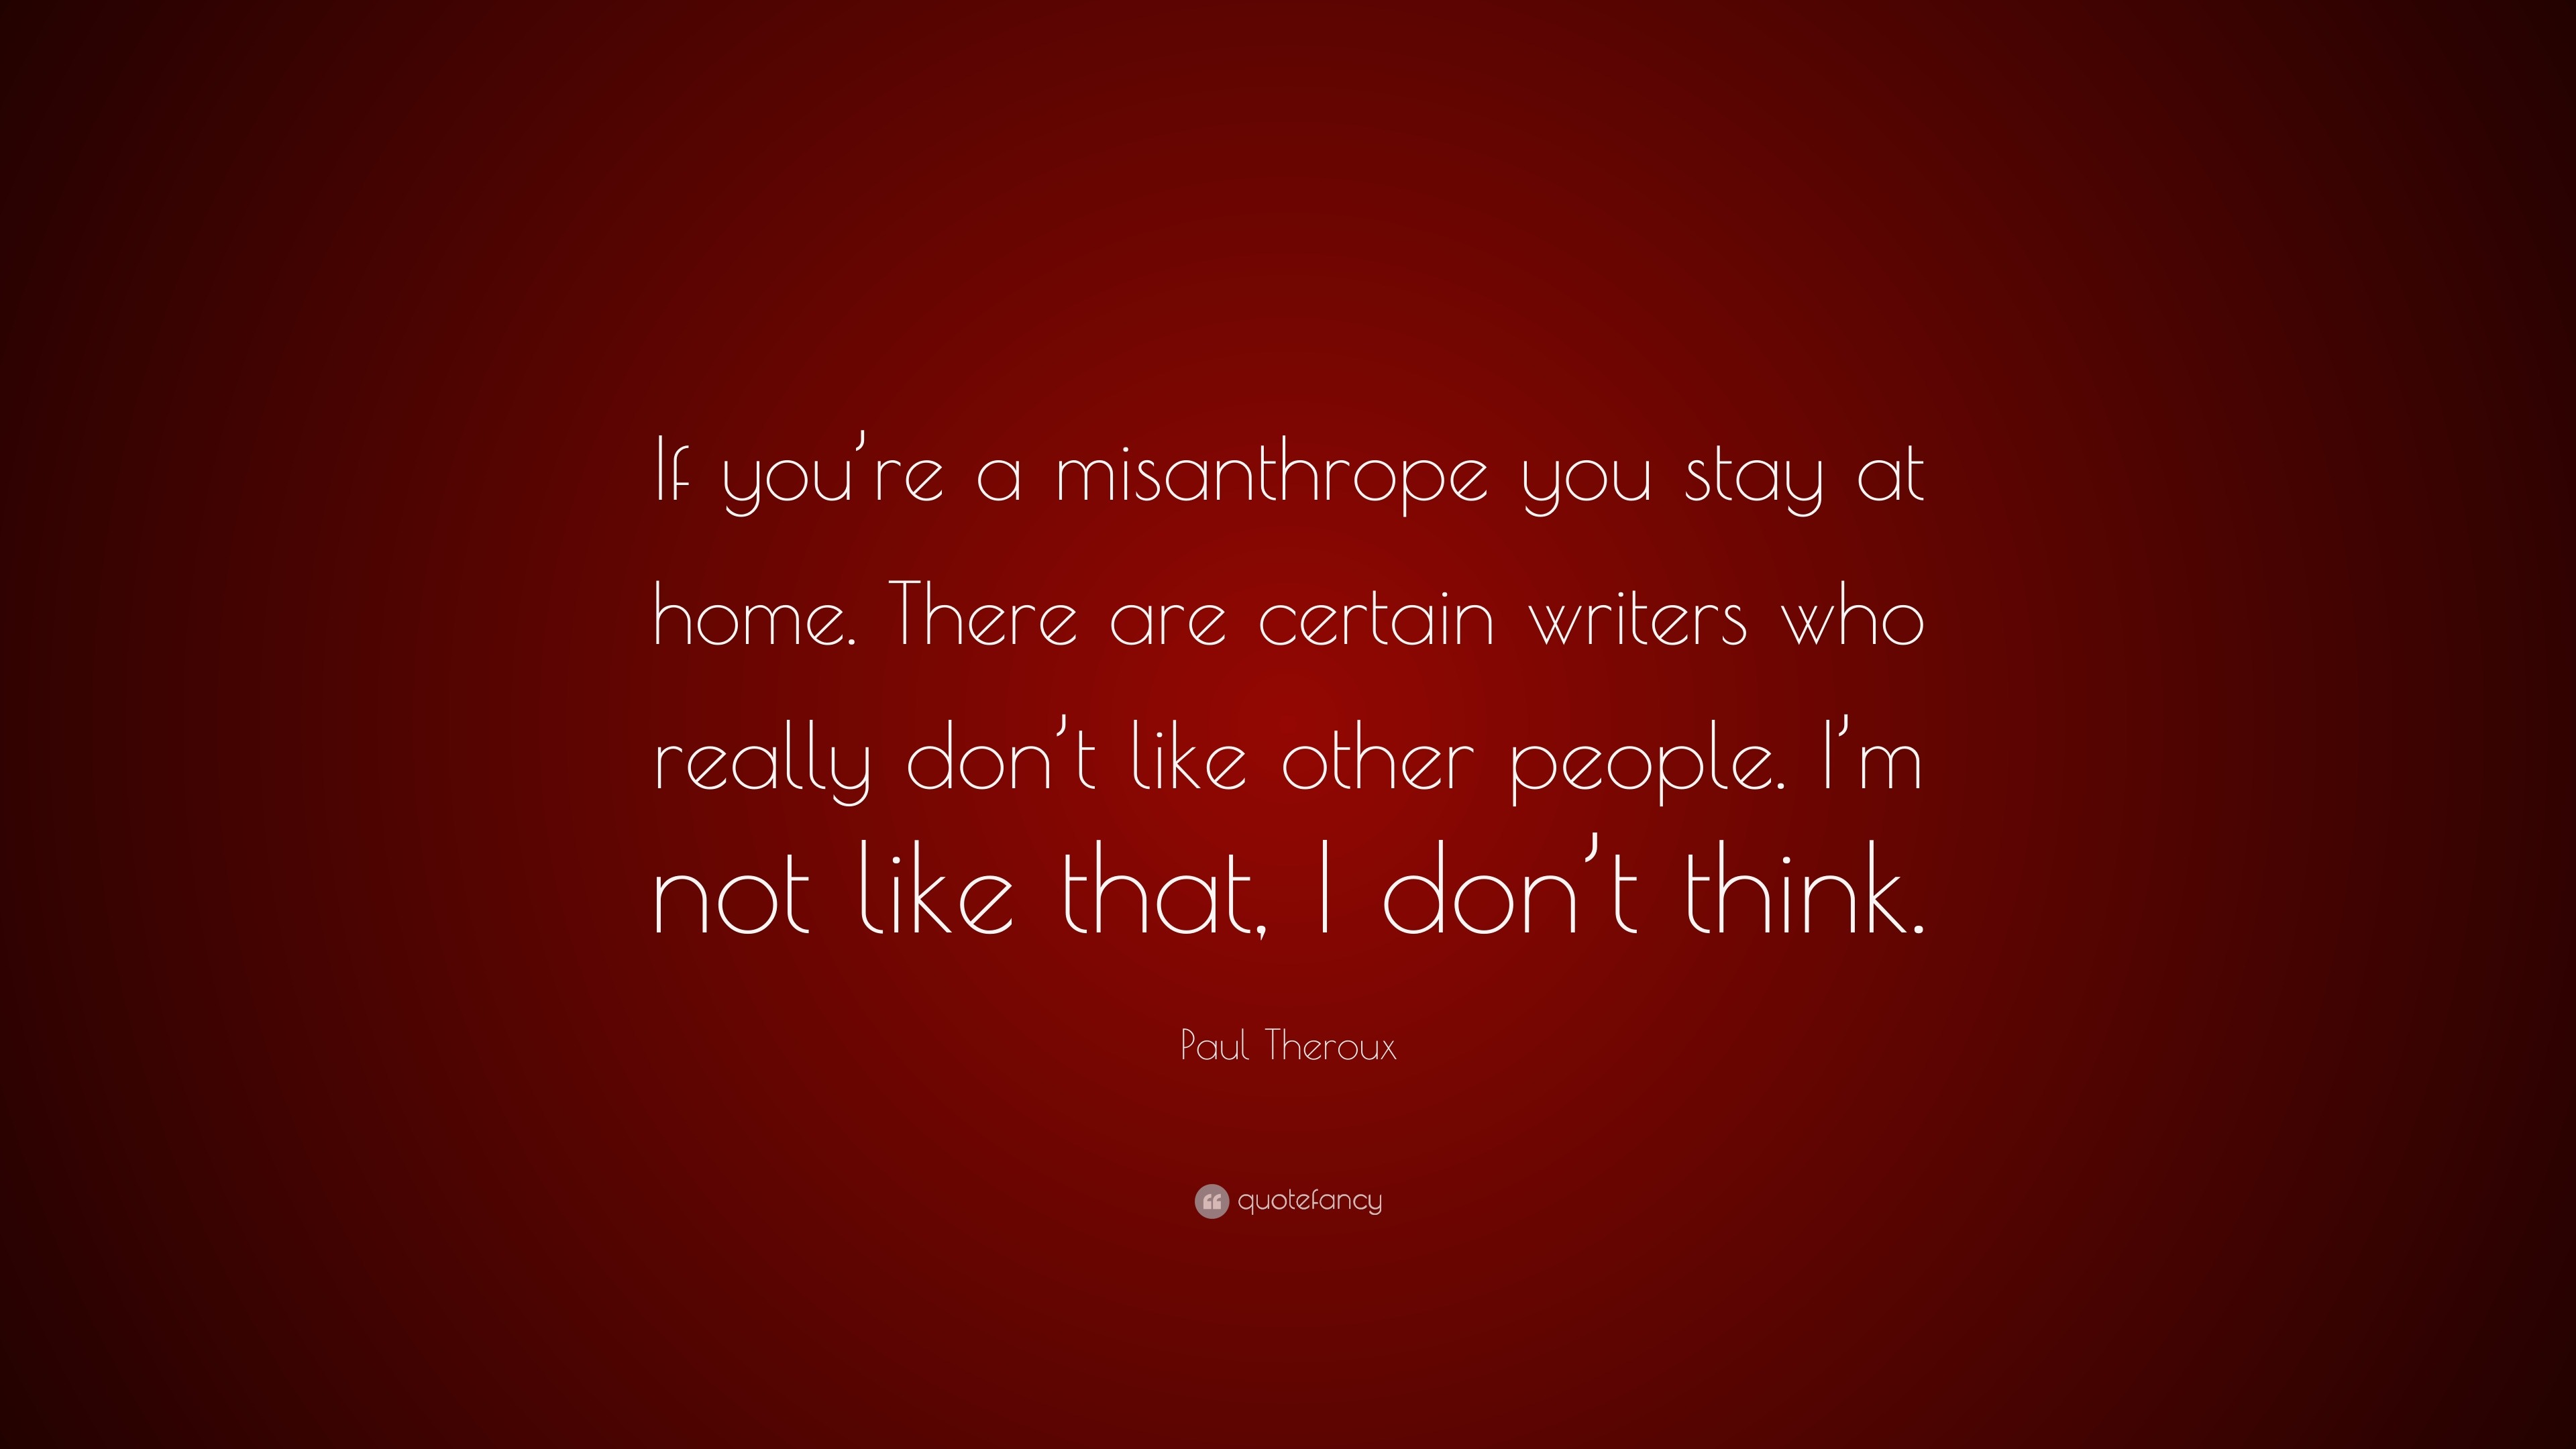 Paul Theroux Quote: “If you’re a misanthrope you stay at home. There ...